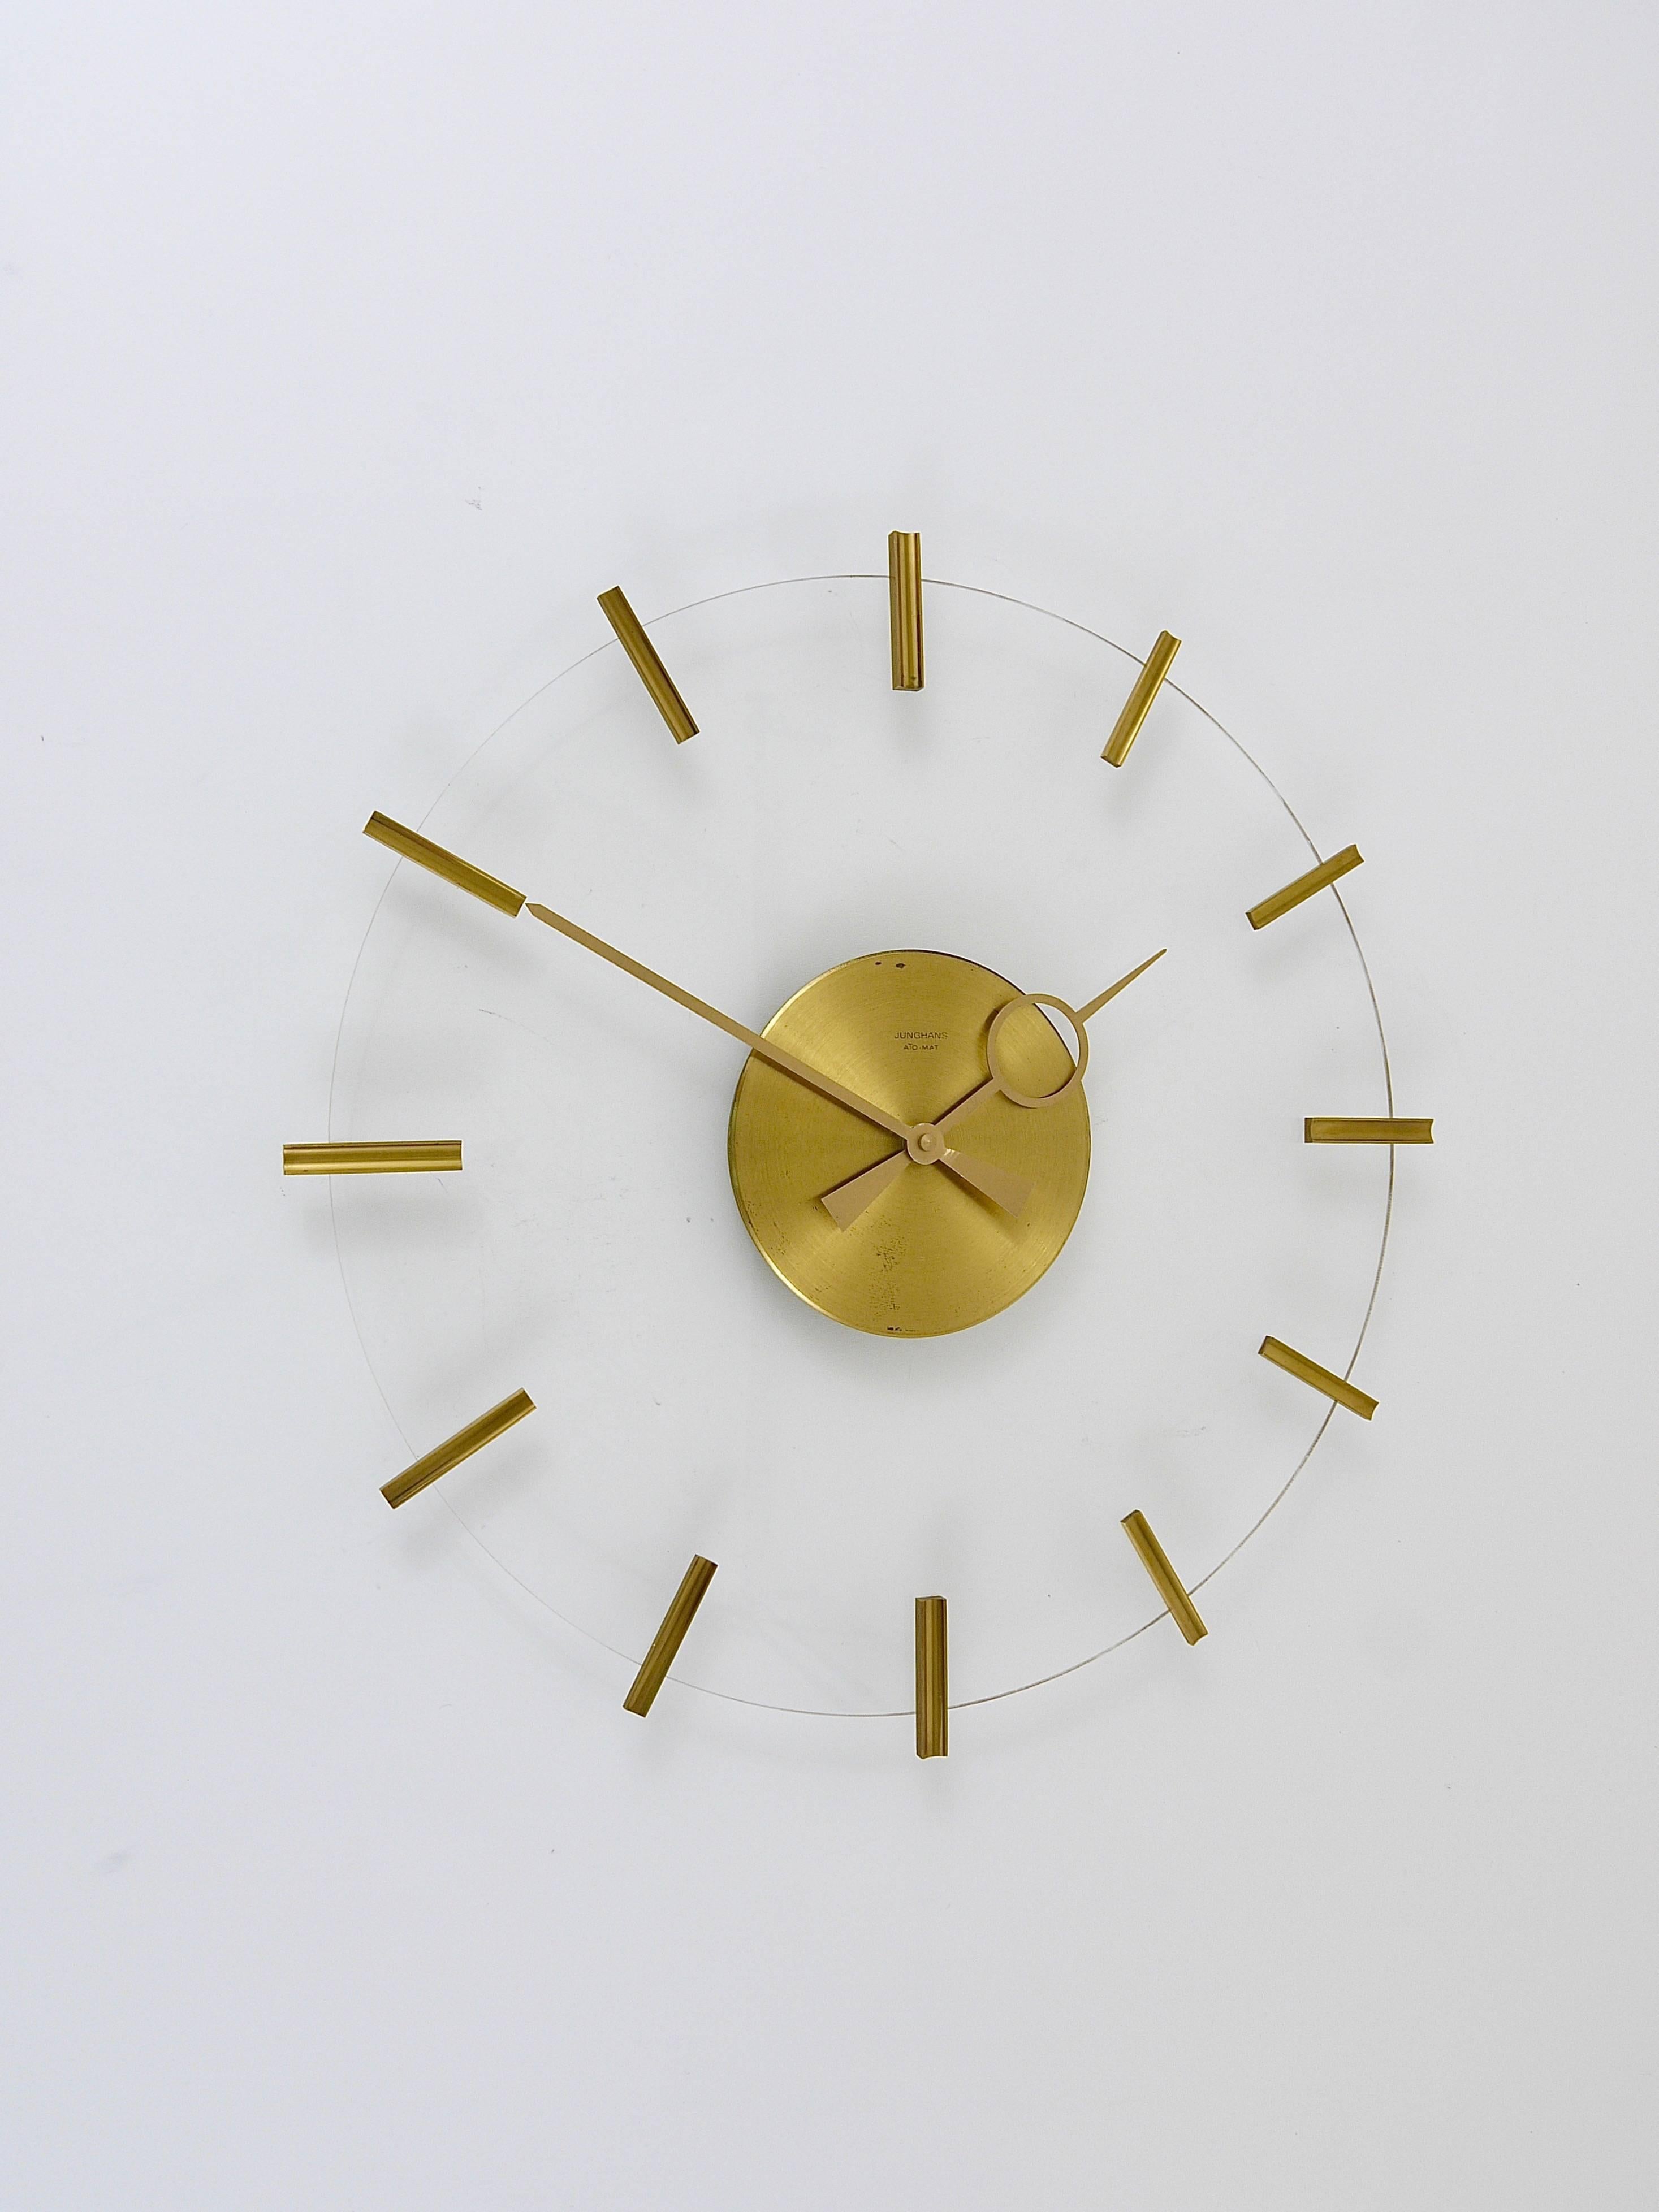 A beautiful round modernist wall clock from the 1950s, executed by Junghans Germany. The clocks face is made of plexiglass, it has nice brass indices and beautiful golden hands. Diameter: 16.5 inches. In good condition with marginal patina on the